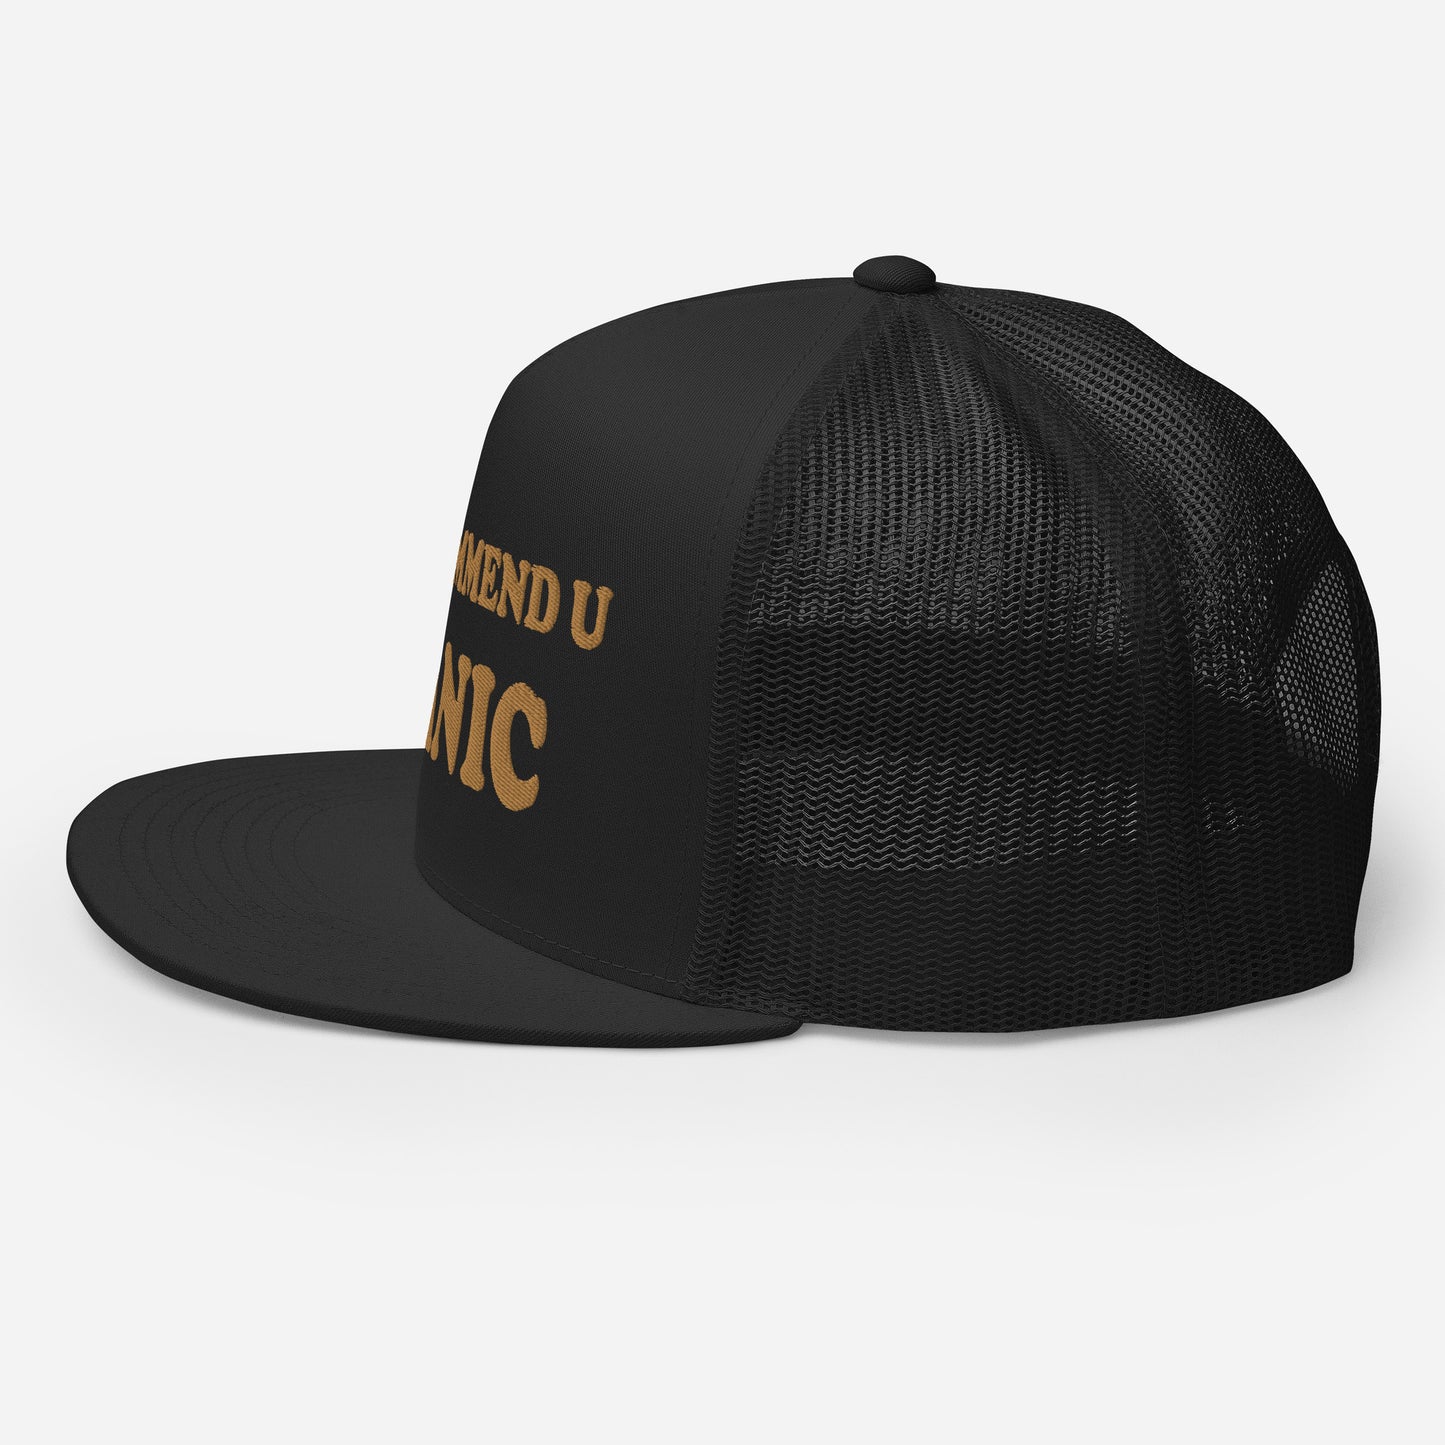 I Would Recommend You Panic Logo-Embroidered and Mesh Trucker Cap - Pixel Gallery